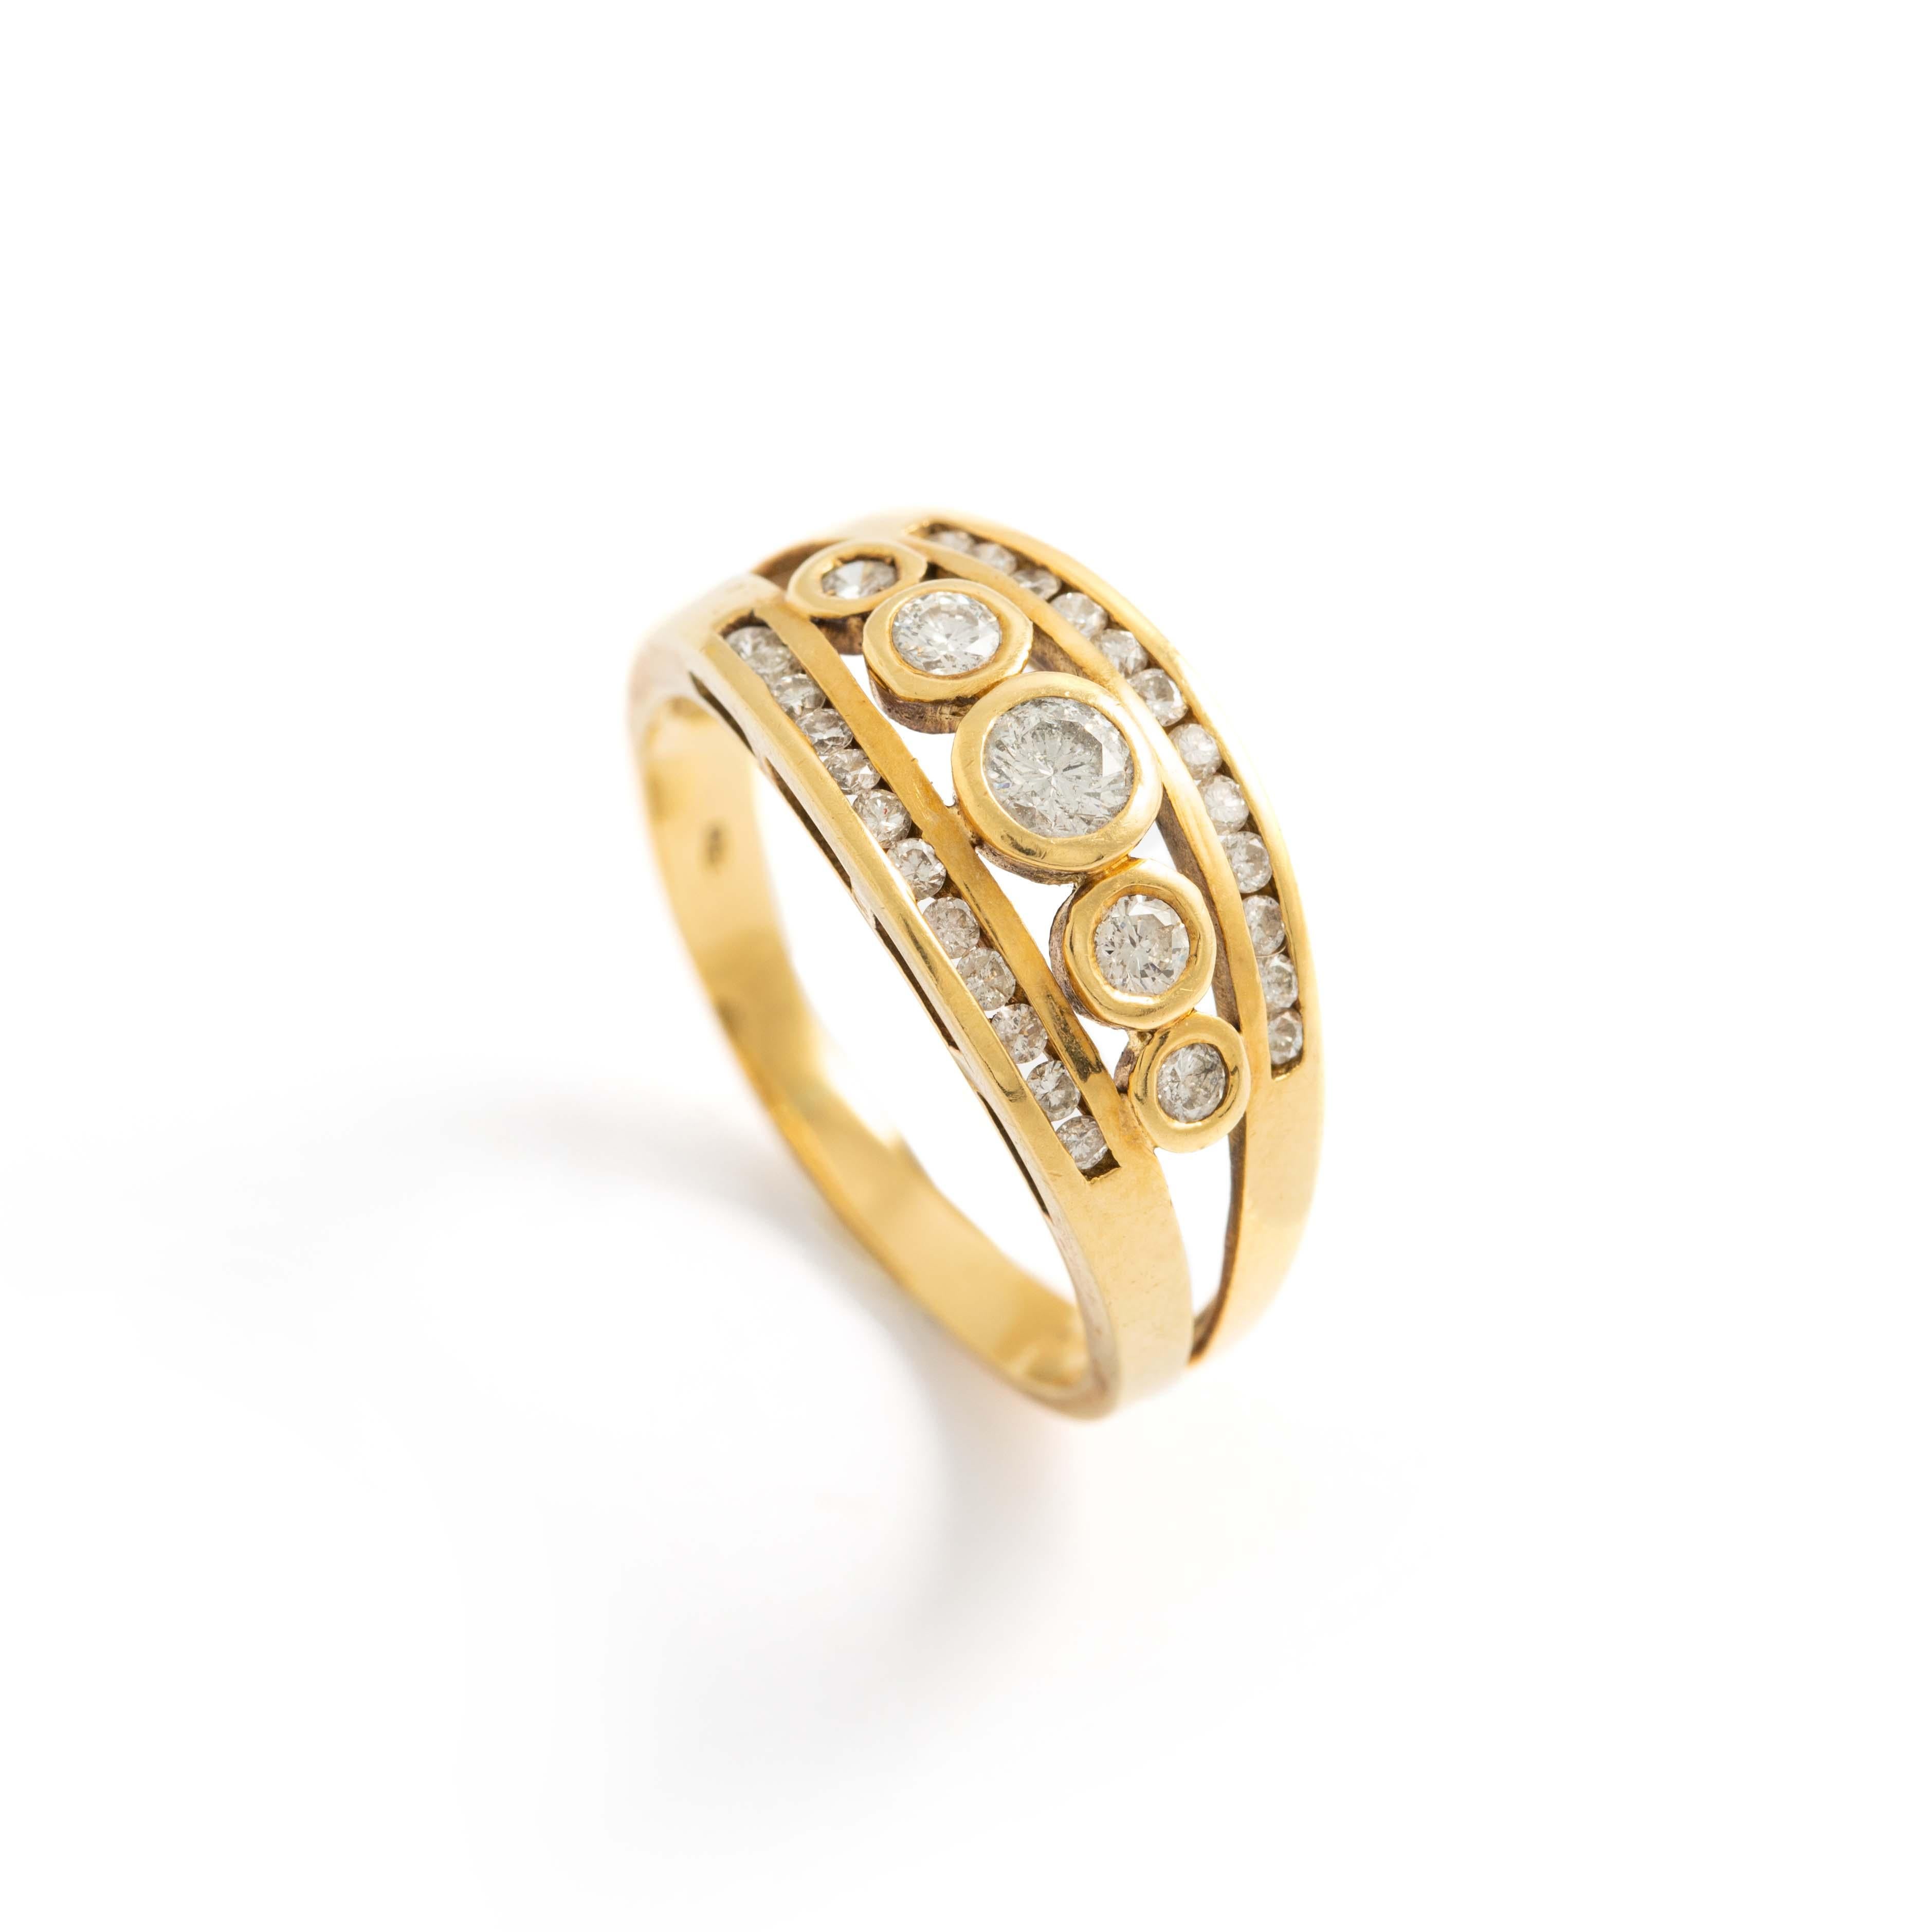 18K yellow gold ring set by round-cut diamonds.
Gross weight: 5.80 grams.